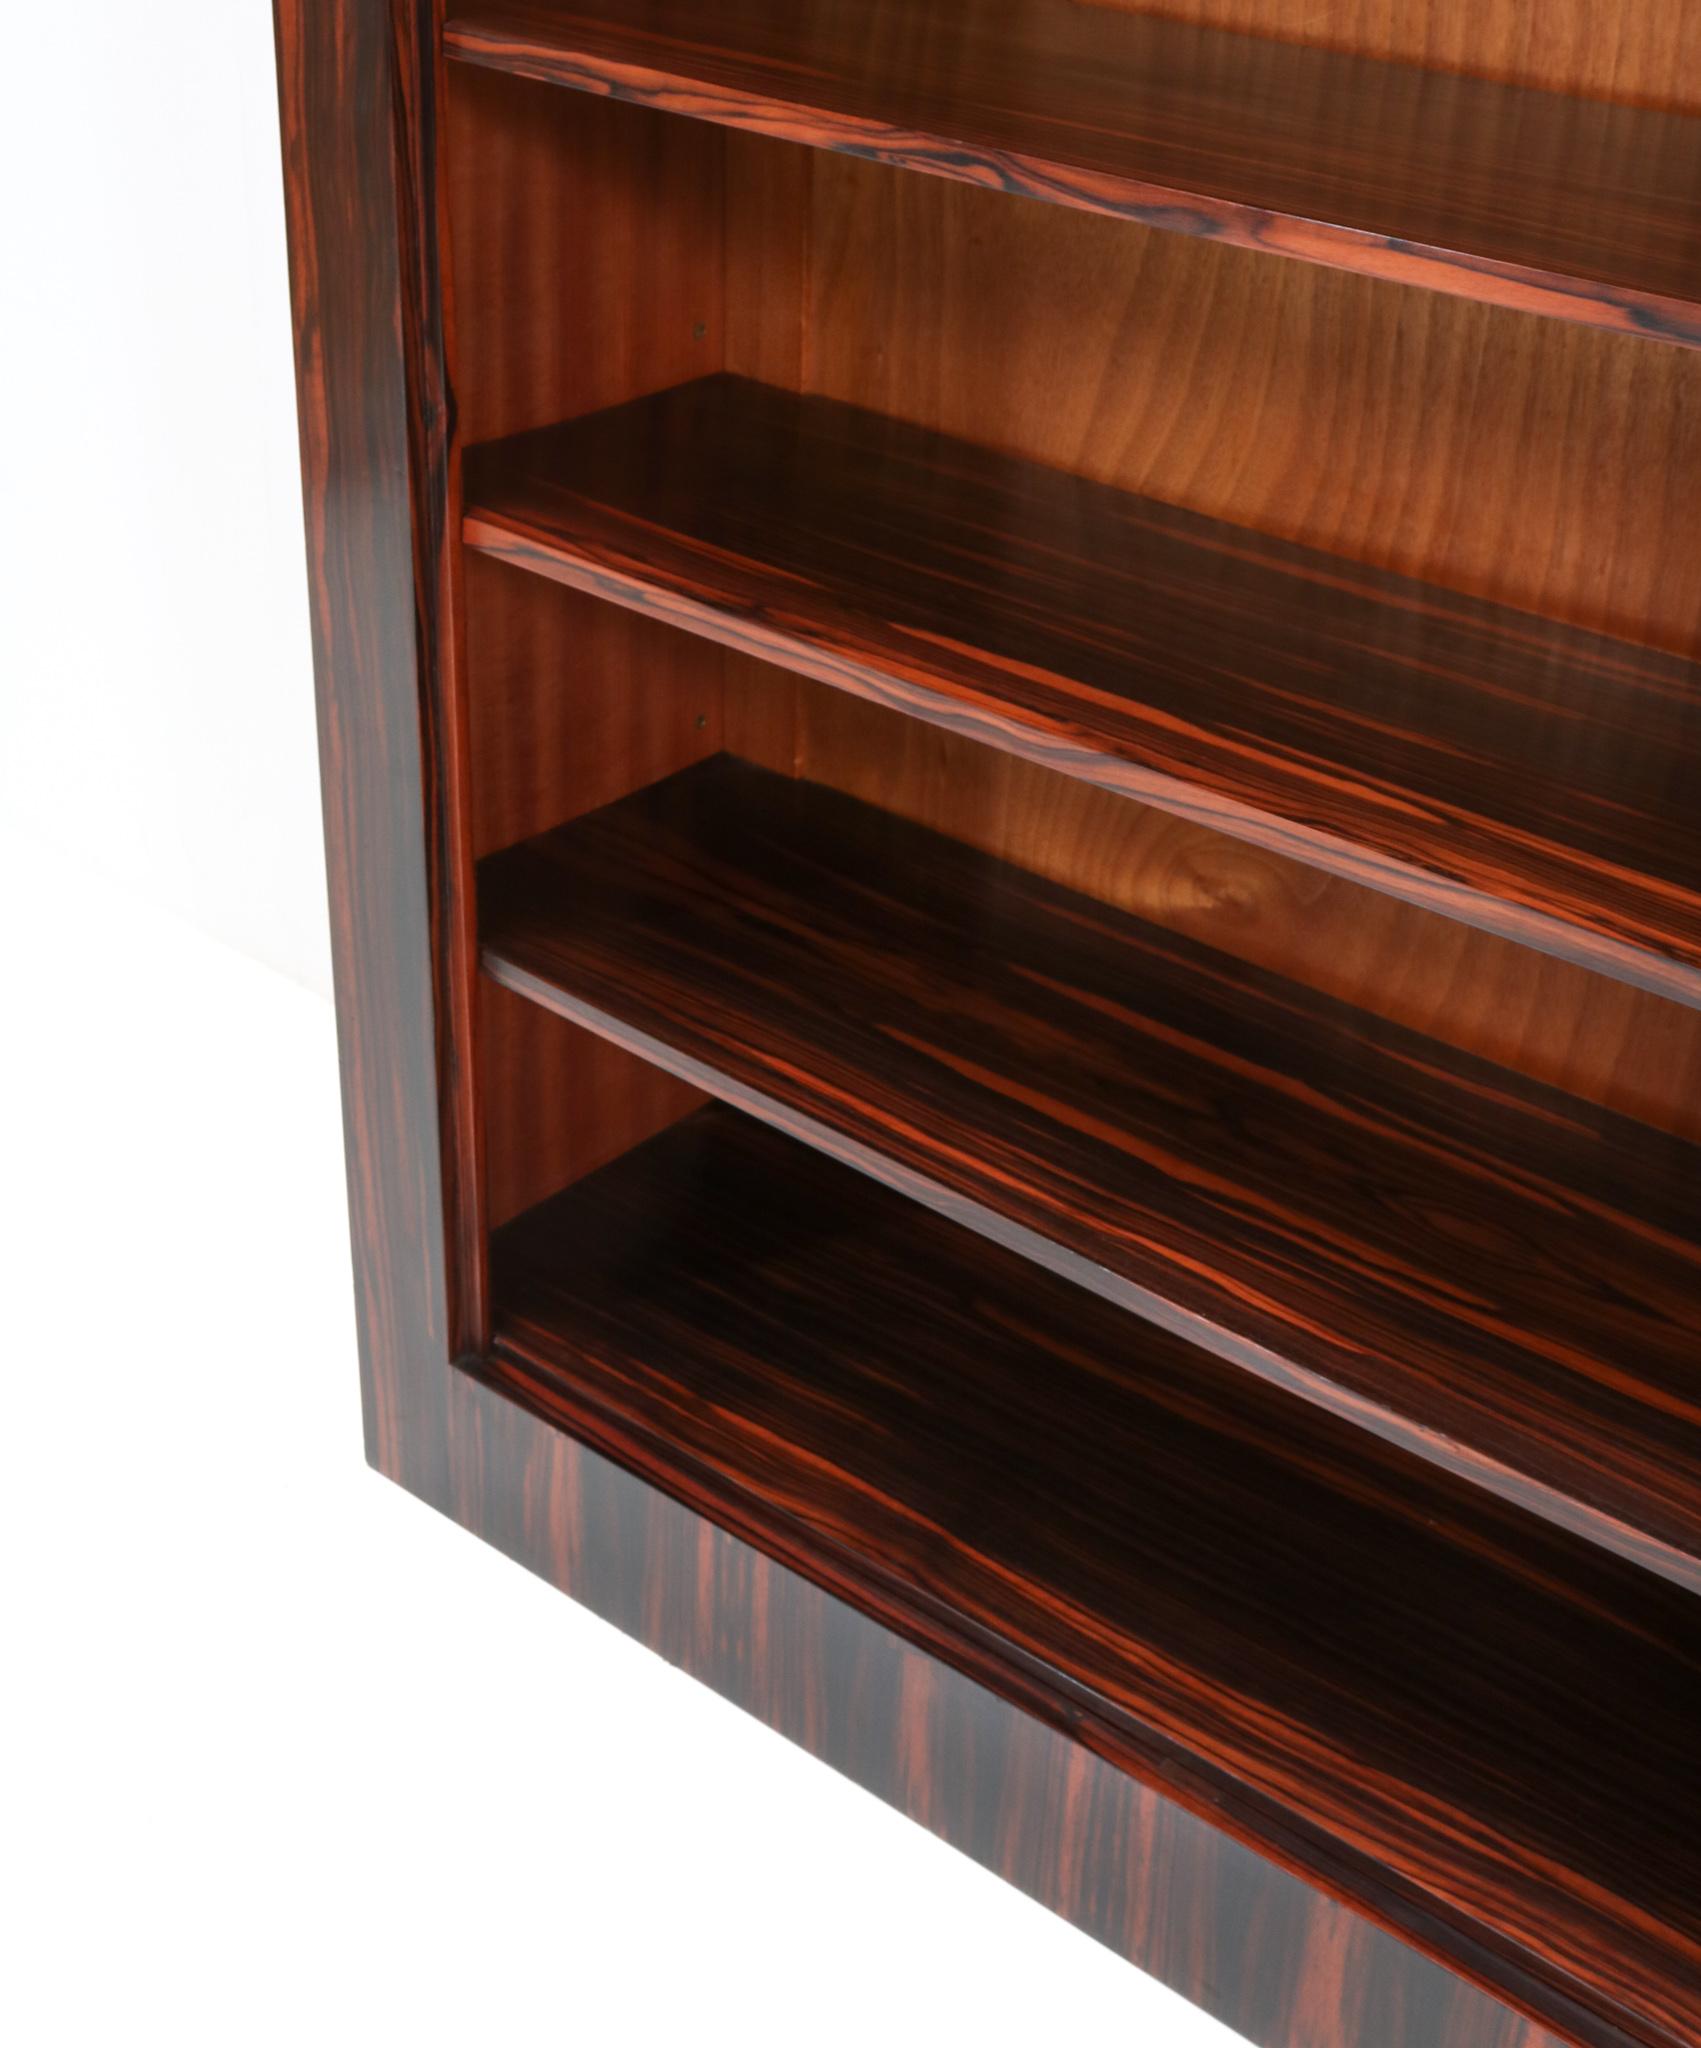 Early 20th Century Macassar Ebony Art Deco Modernist Bookcase by Hendrik Wouda for Pander, 1920s